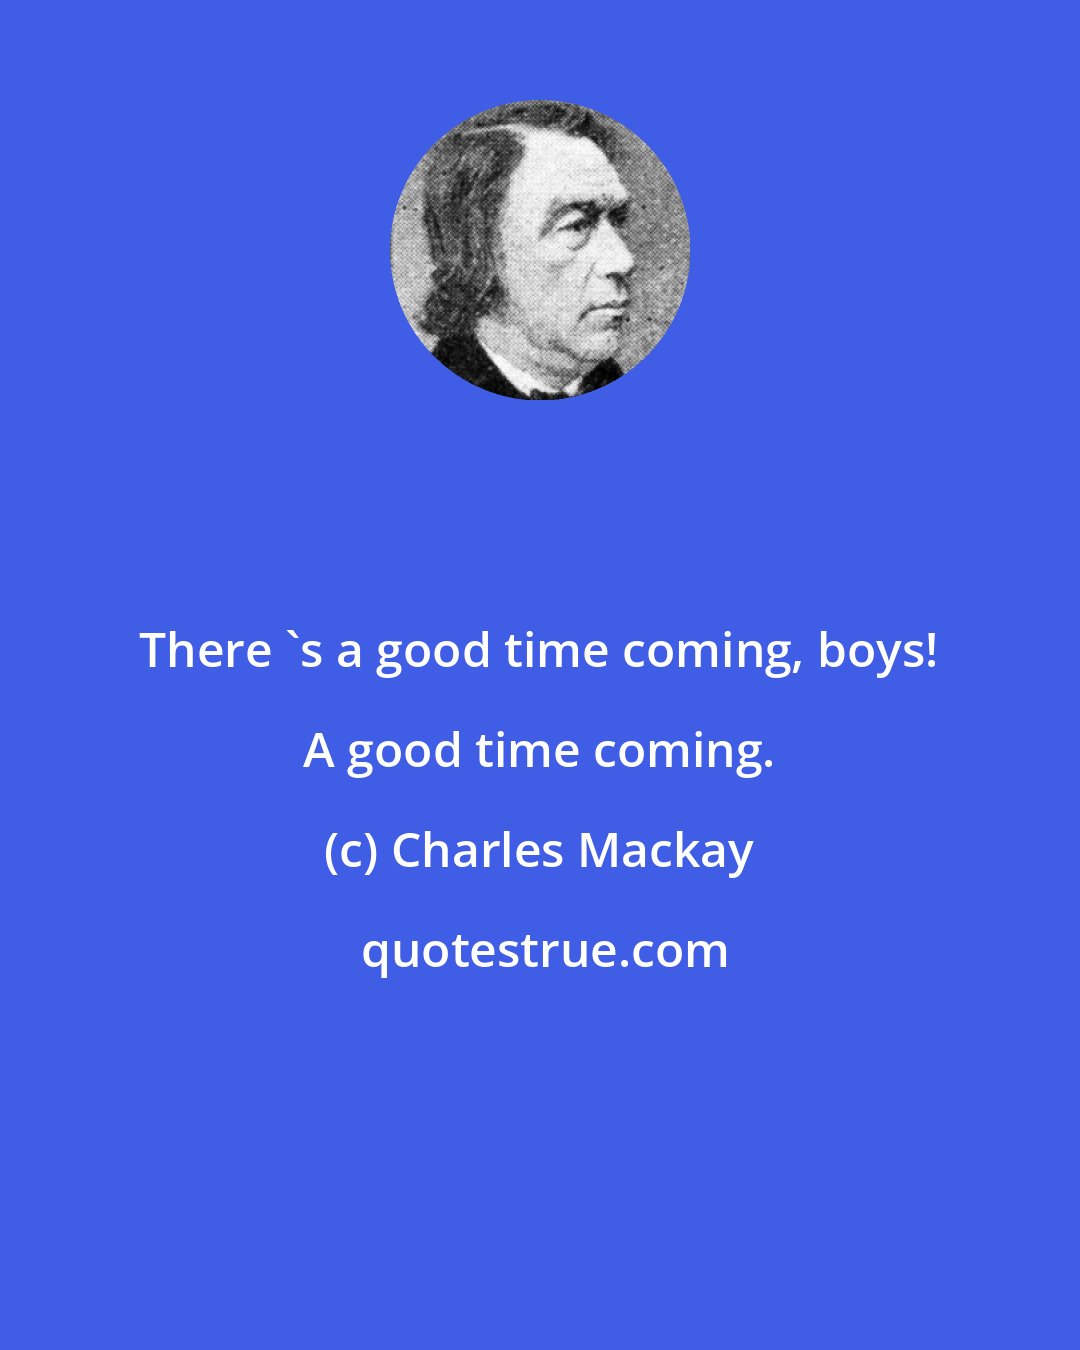 Charles Mackay: There 's a good time coming, boys! A good time coming.